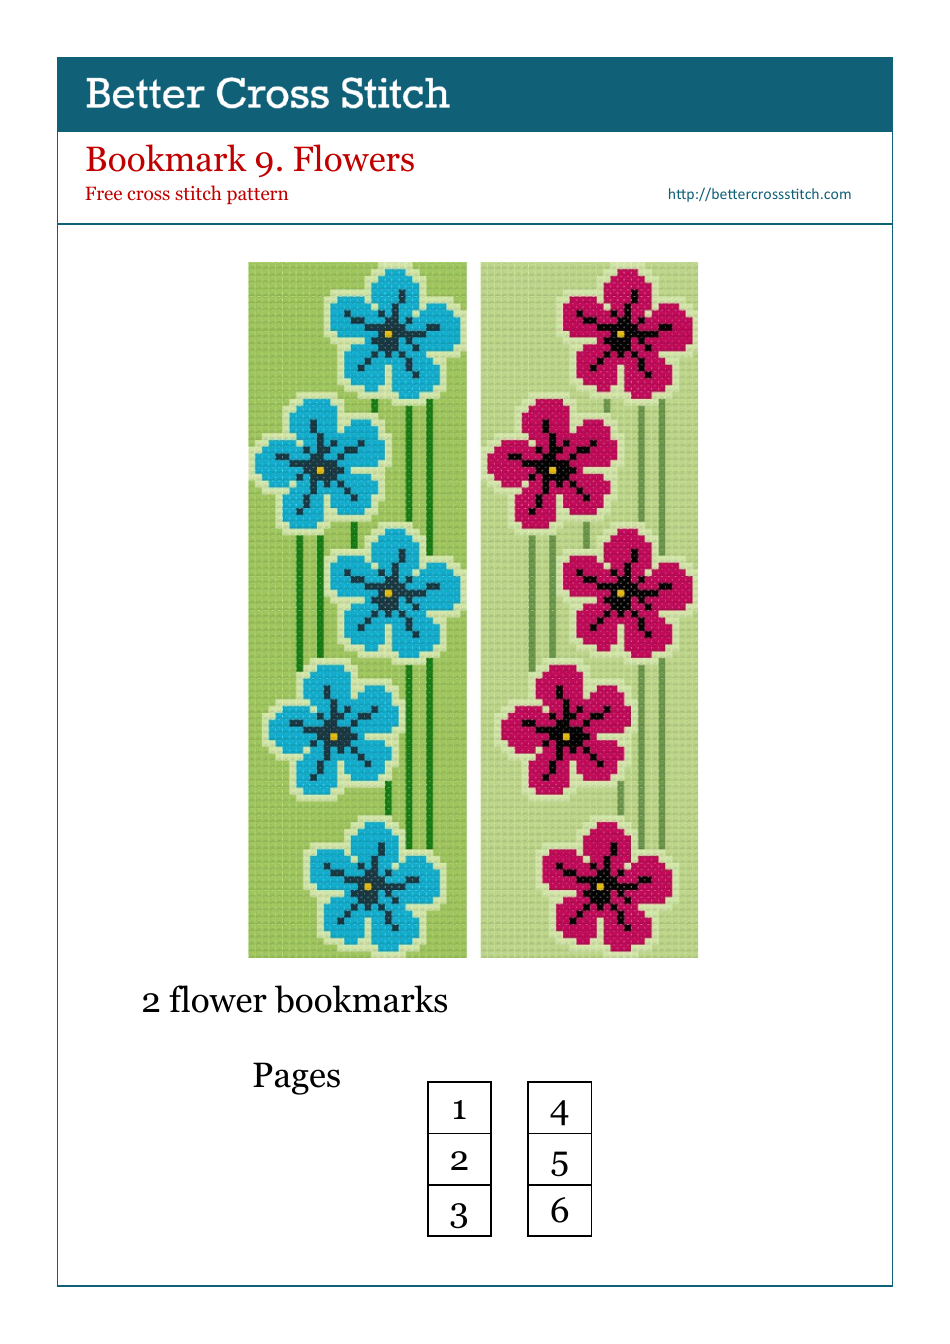 Flowers Bookmark Cross-stitch Pattern Preview